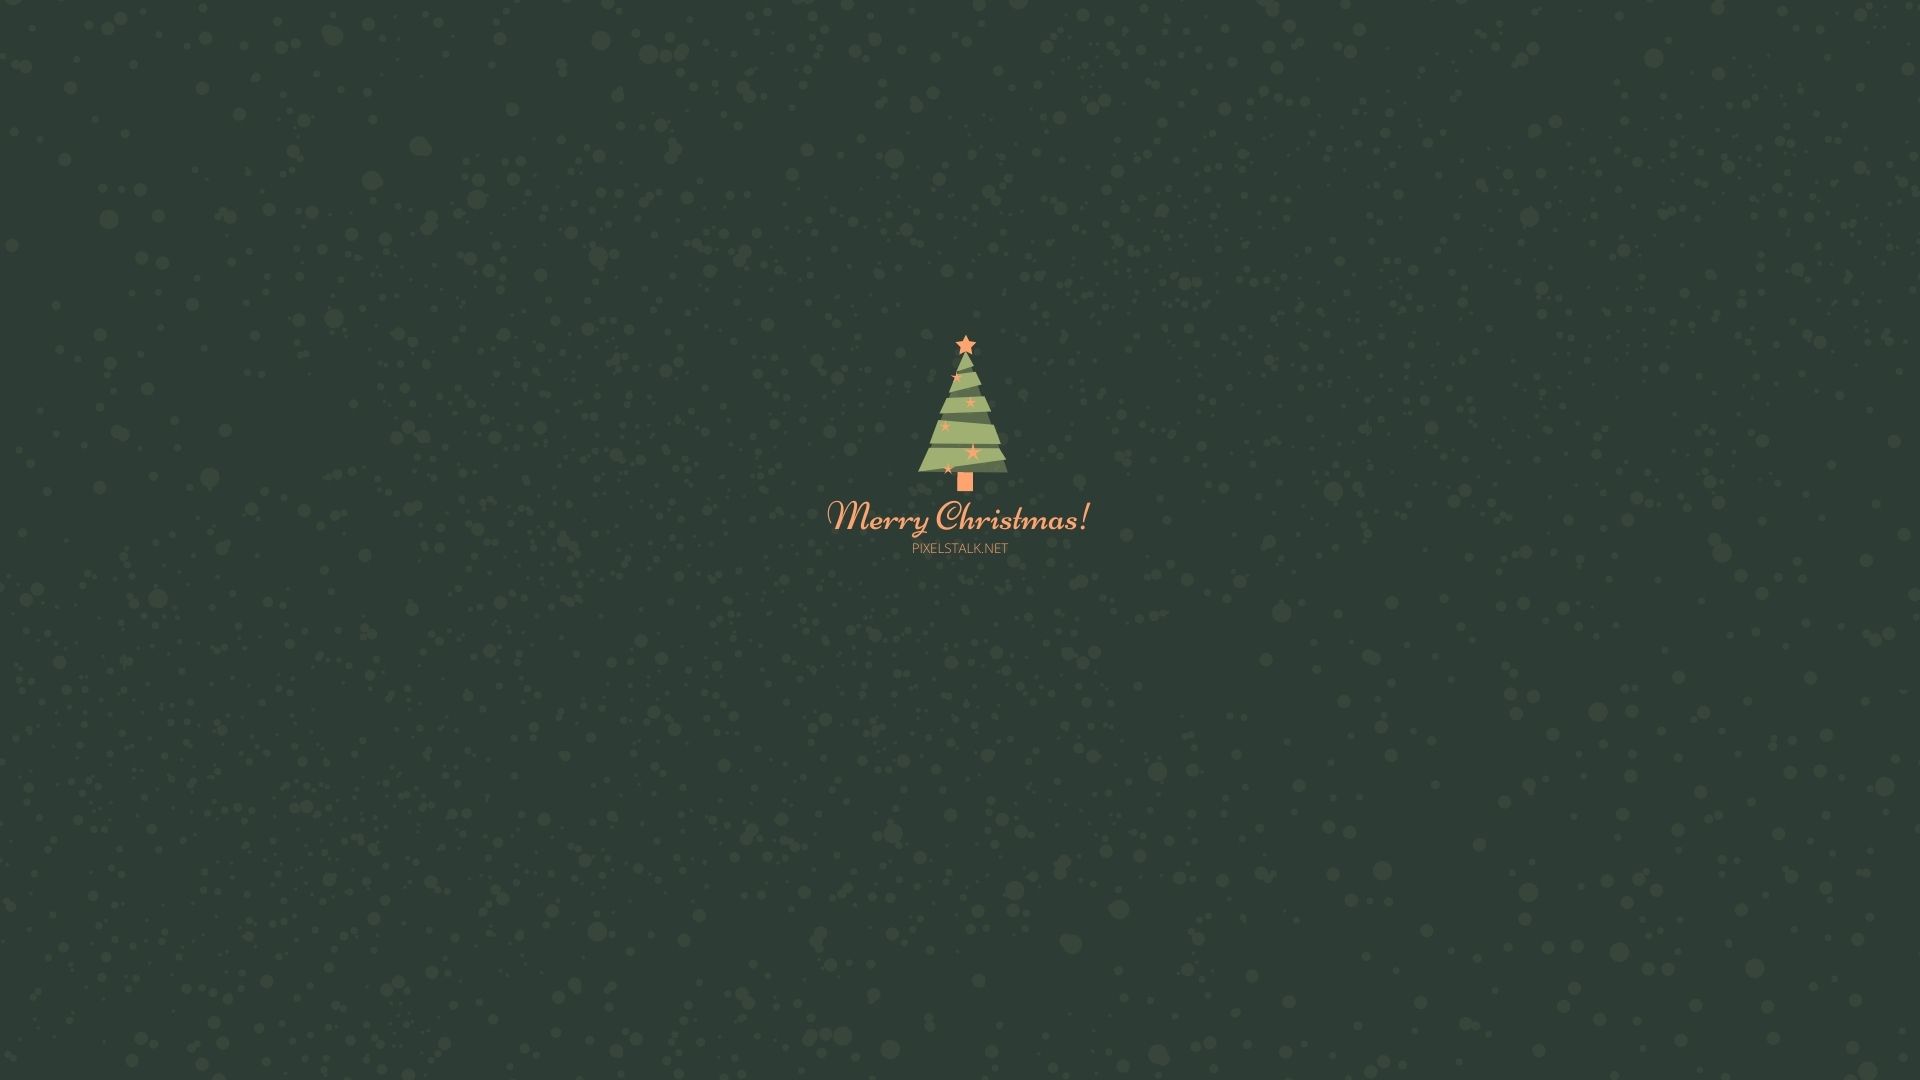 Festive Christmas wallpapers for iPhone and iPad